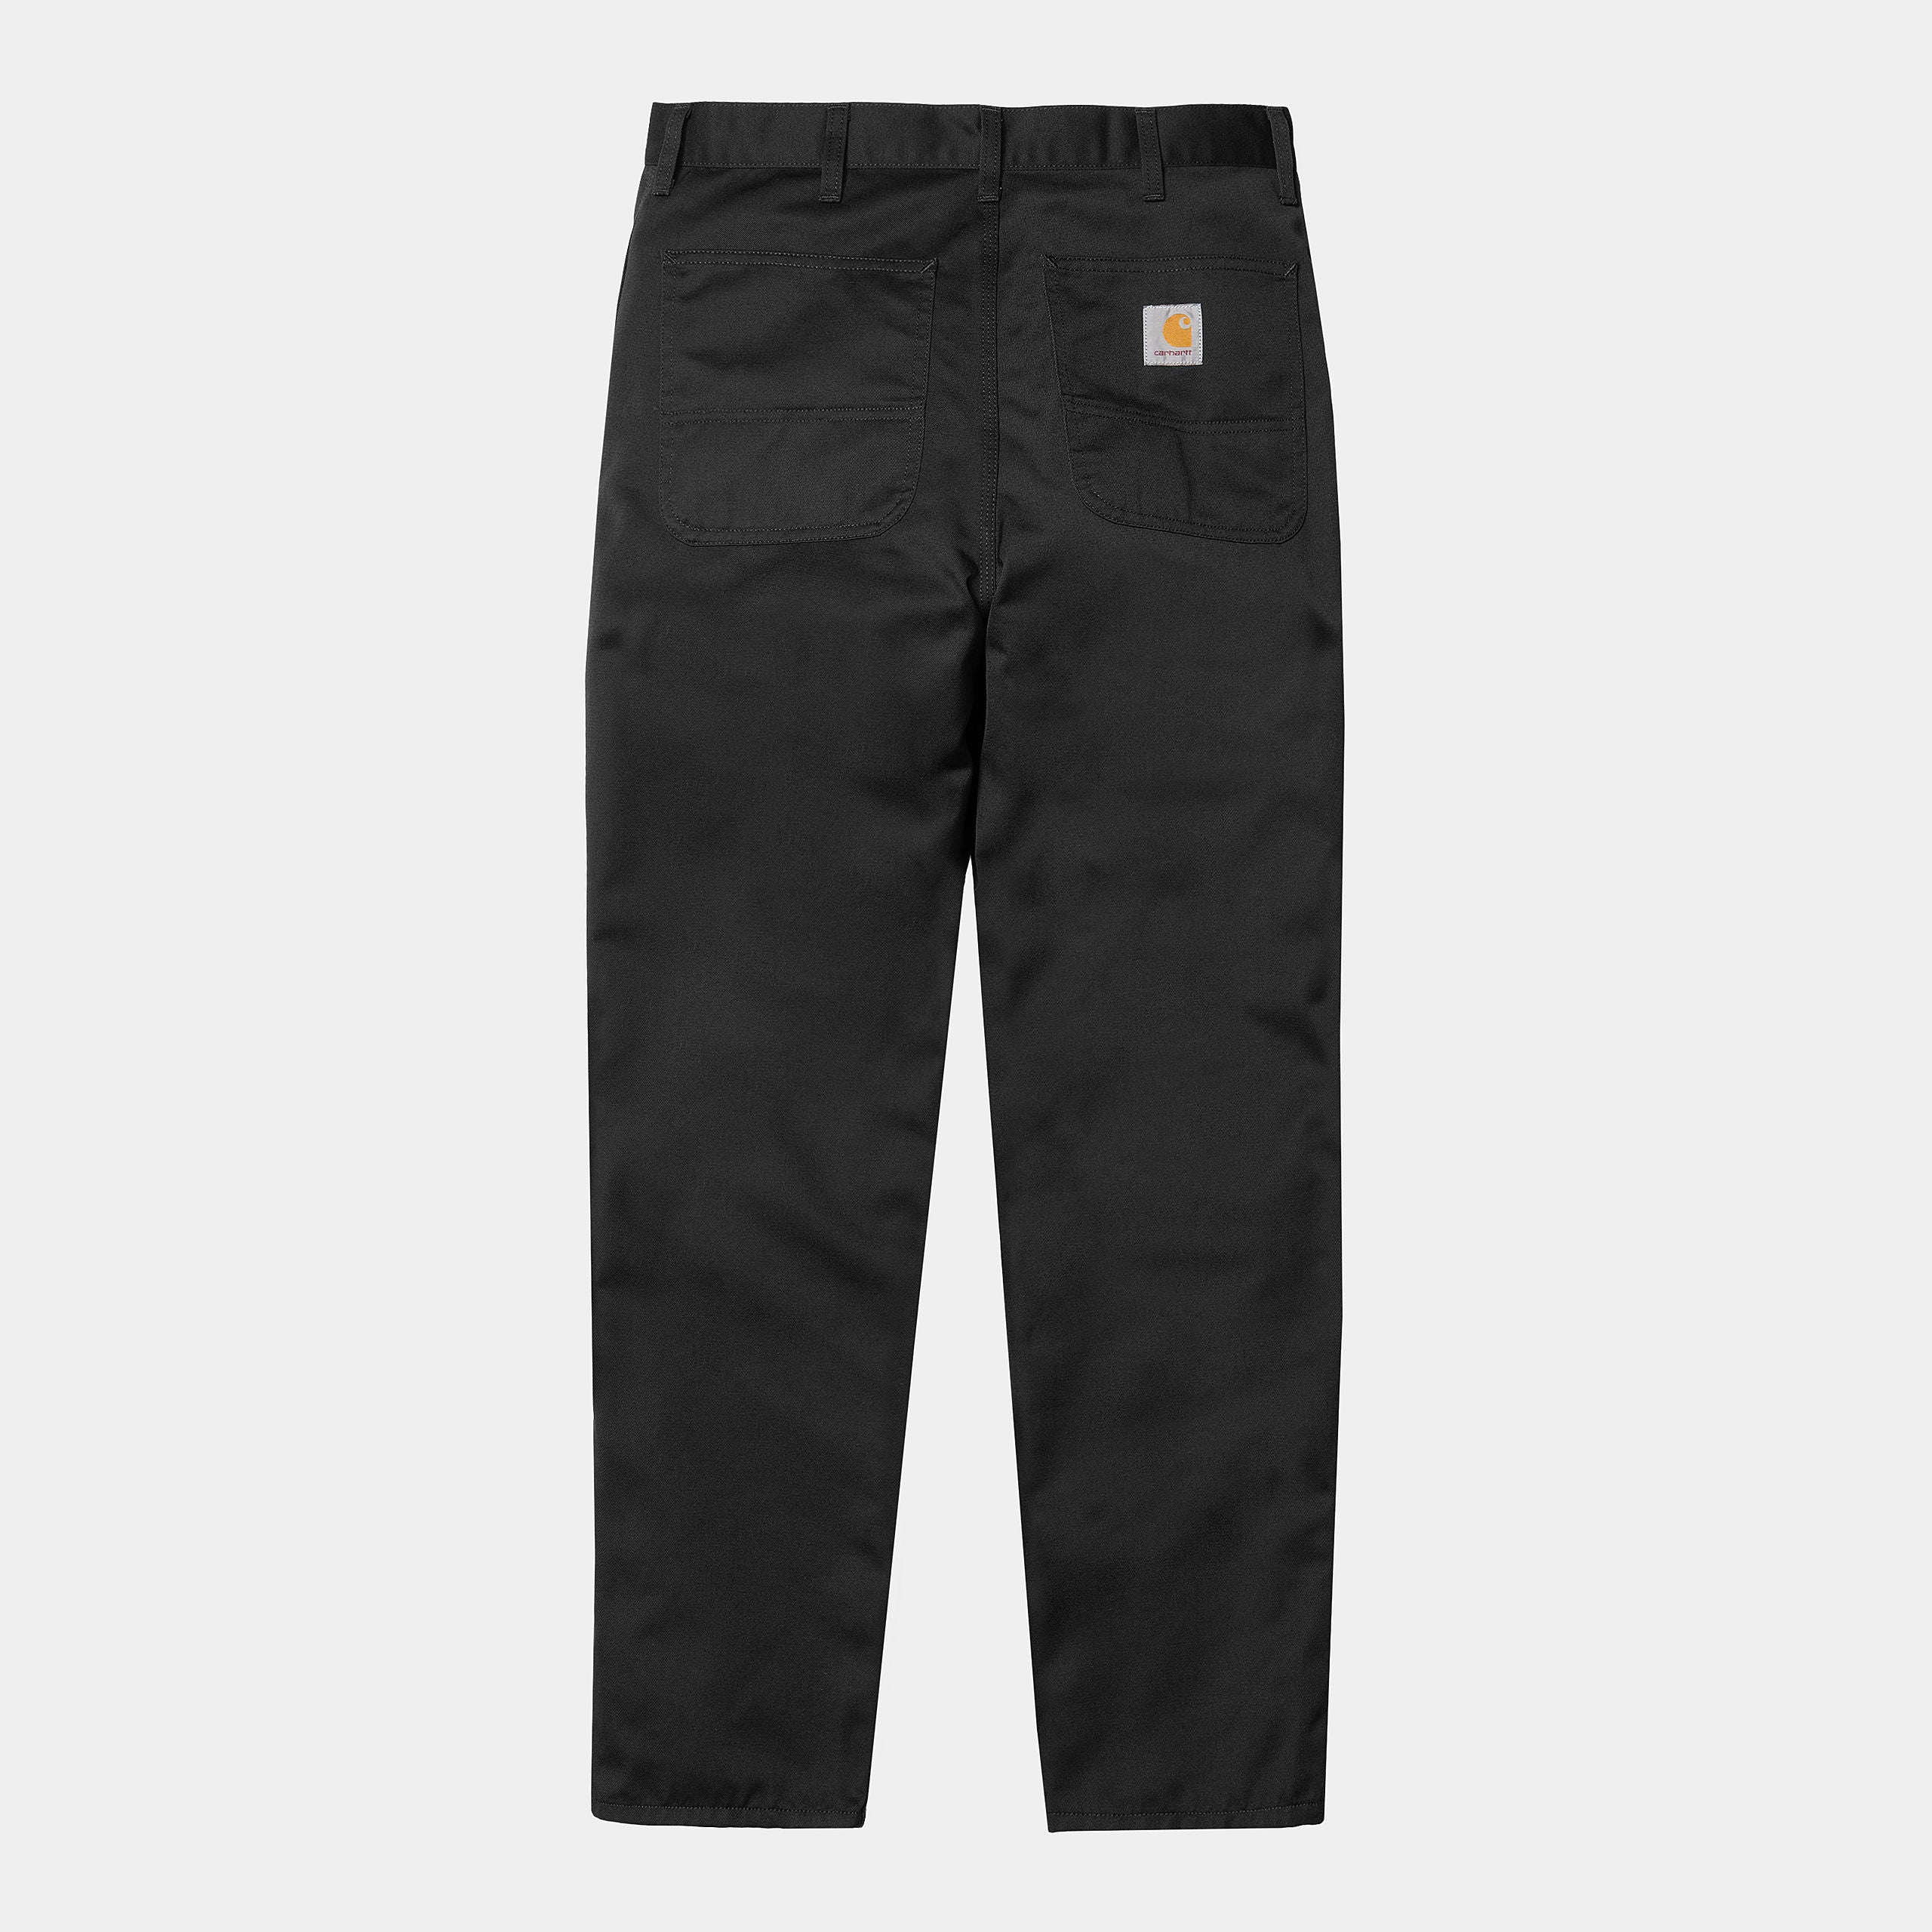 Carhartt Wip Simple Pant Polyester/cotton Denison Twill, 8.8 Oz Black Rinsed Uomo - 4